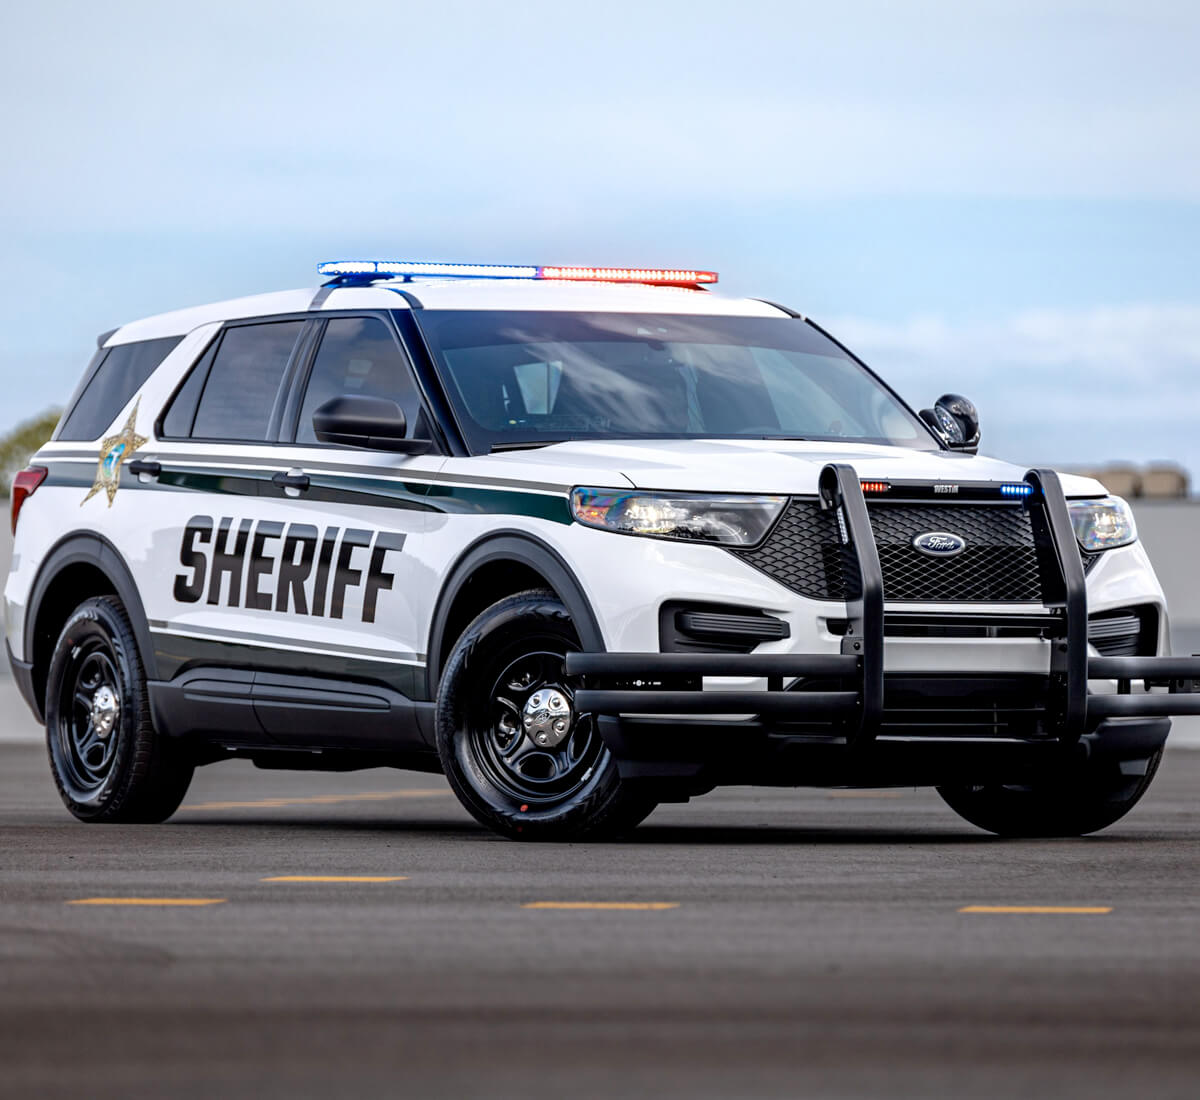 White Ford Police SUV